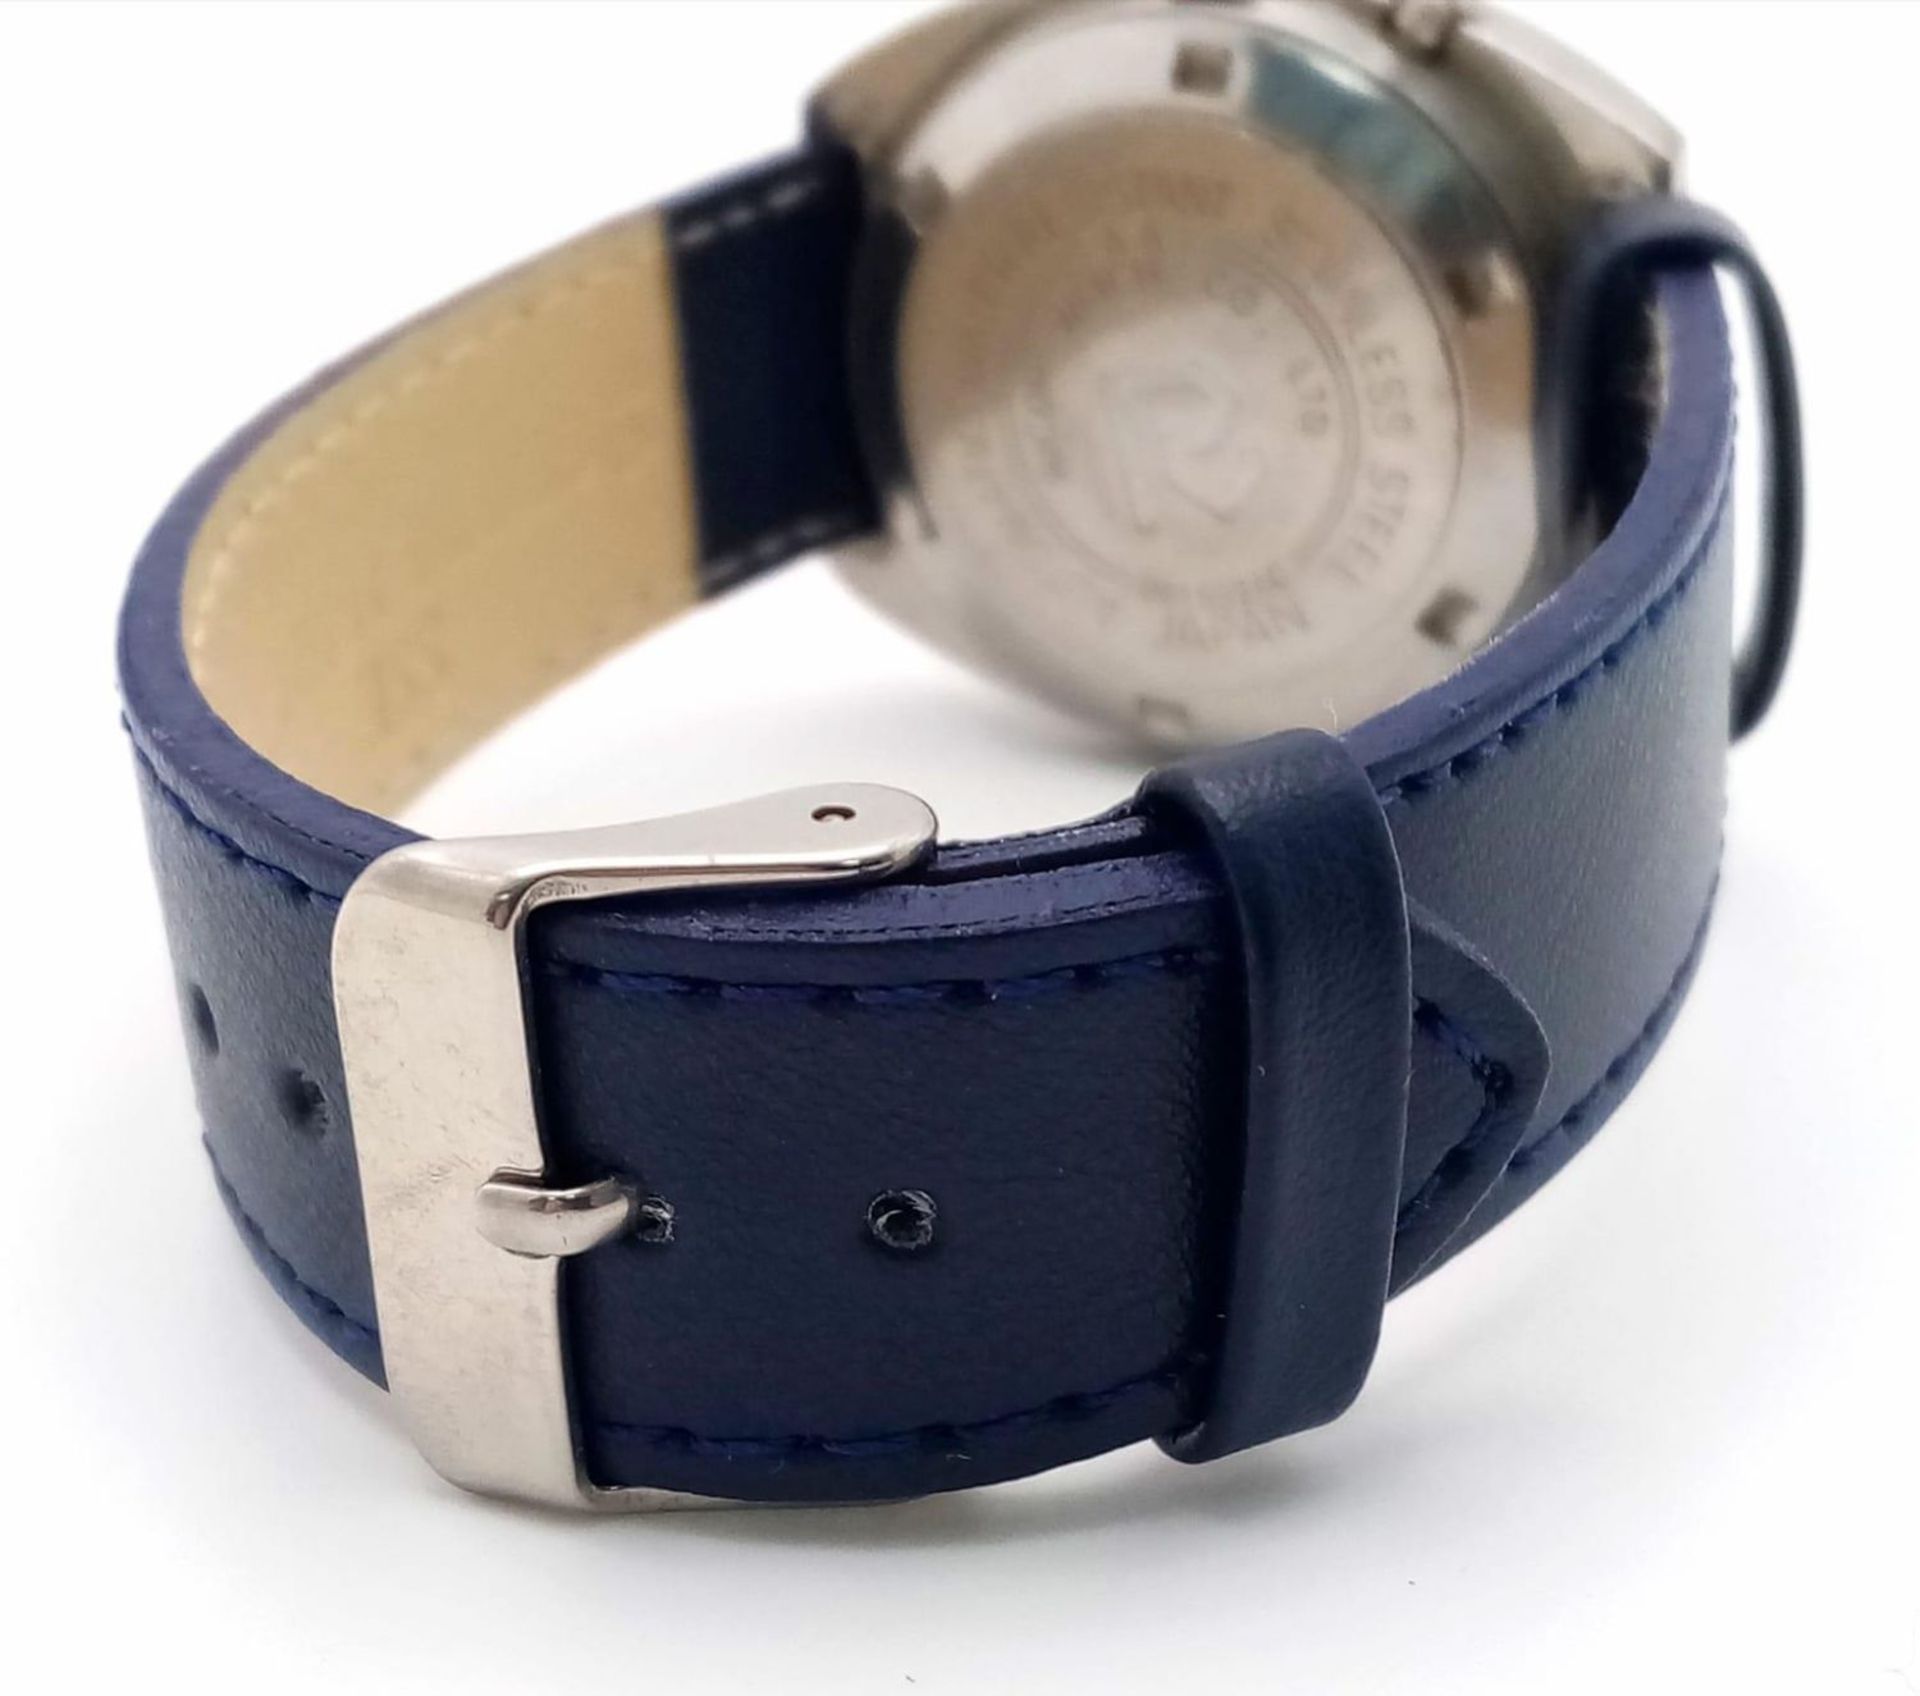 A Vintage Ricoh Automatic Gents Watch. Blue leather strap. Stainless steel case - 37mm. Blue dial - Image 9 of 12